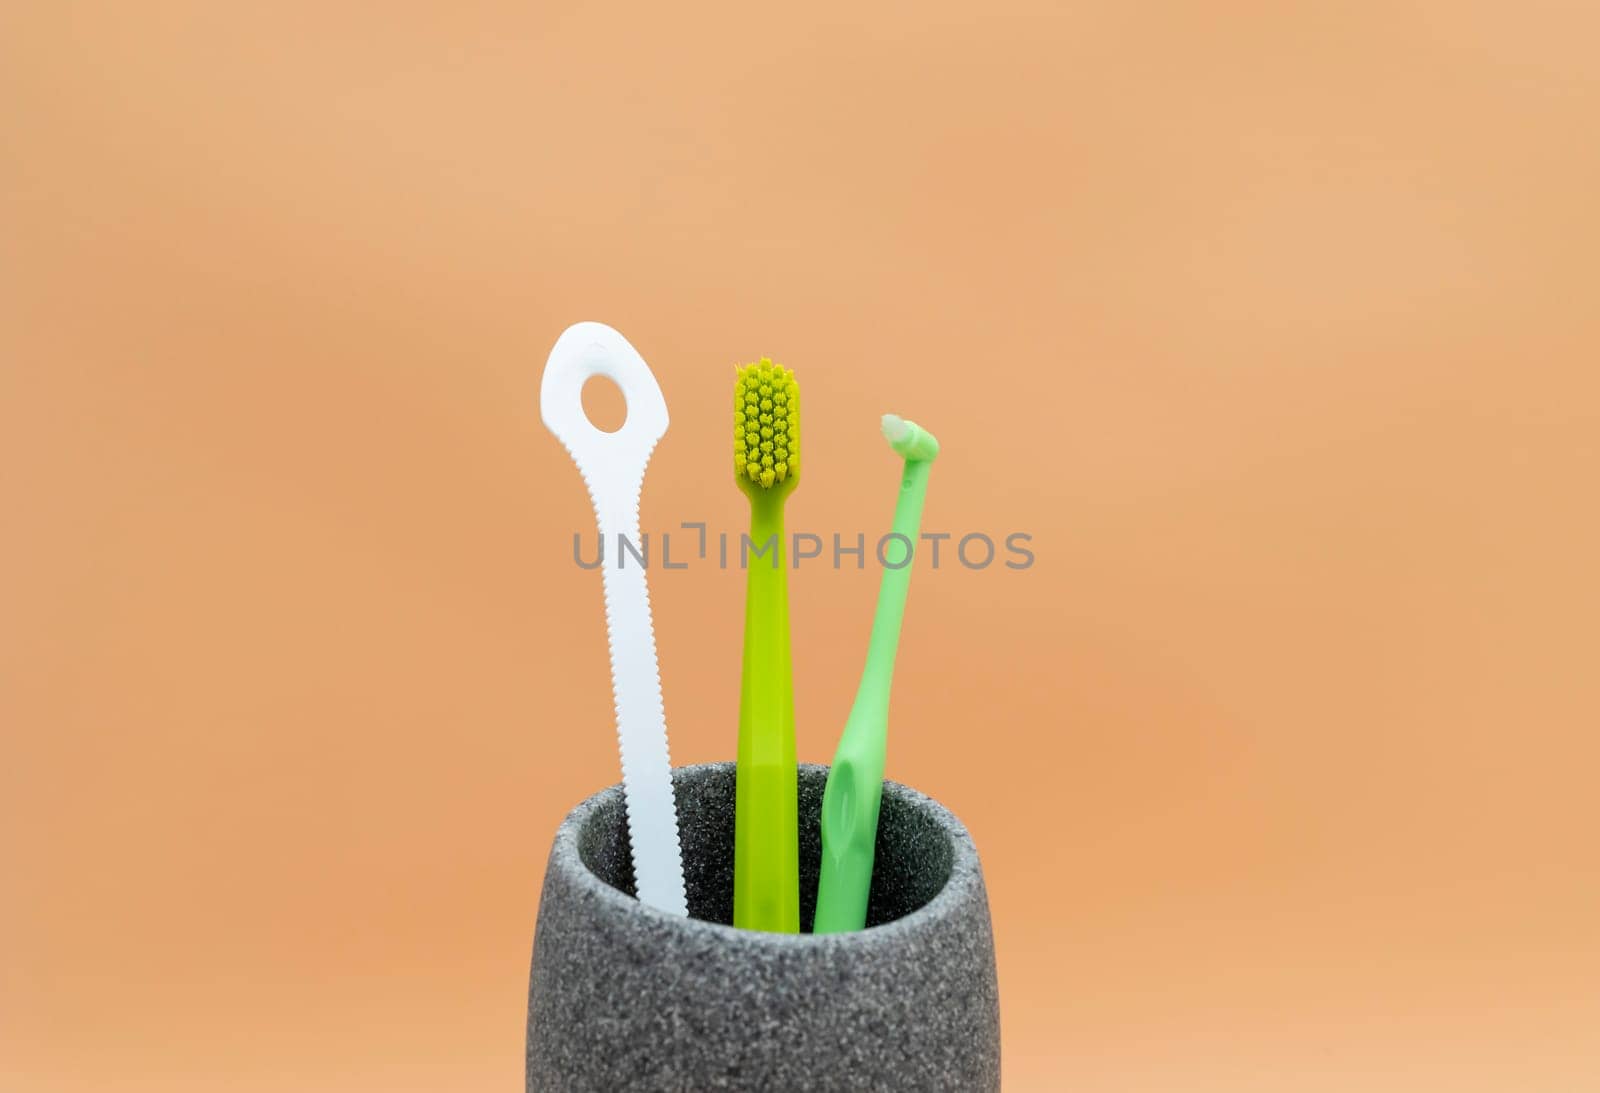 Personal Dental Oral Hygiene Set. Green Toothbrush, White Flexible Tongue Scraper, Interdental Toothbrush For Cleaning Between Teeth On Peach Yellow Background. Space For Text. Horizontal Plane. by netatsi